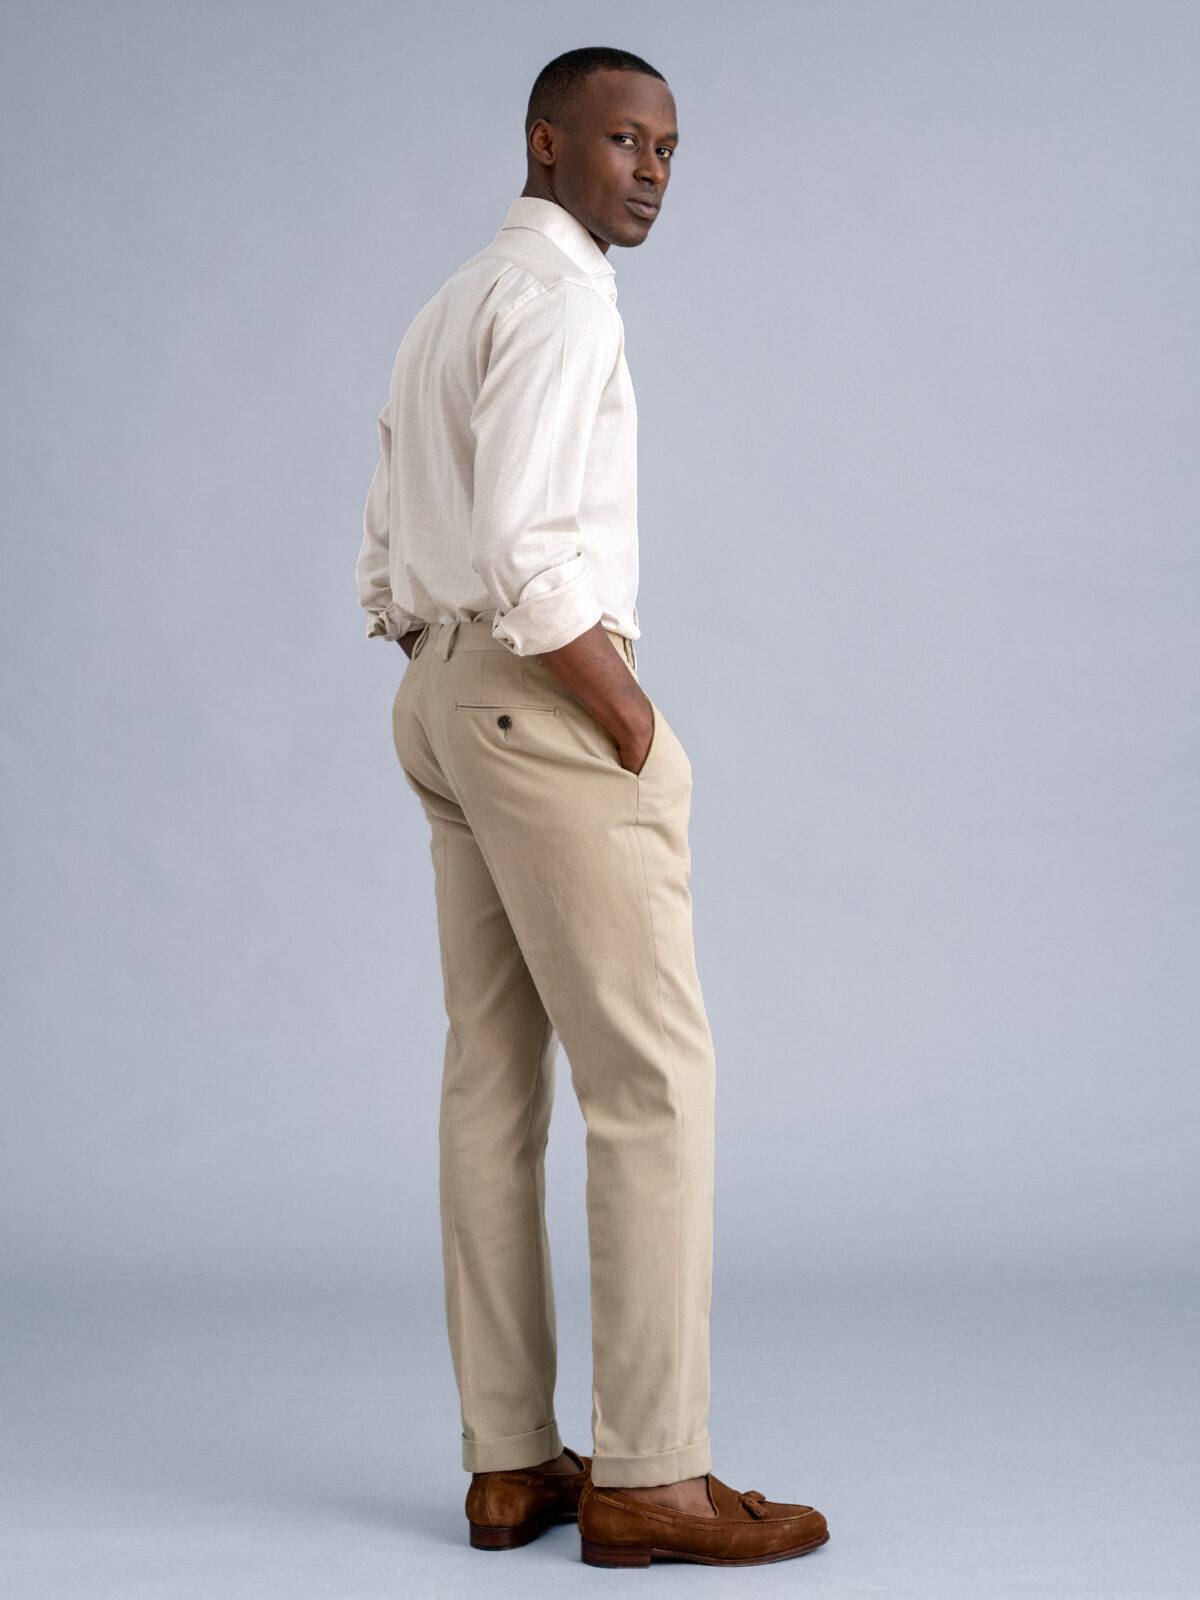 Beige Heavy Brushed Cotton Stretch Dress Pant - Custom Fit